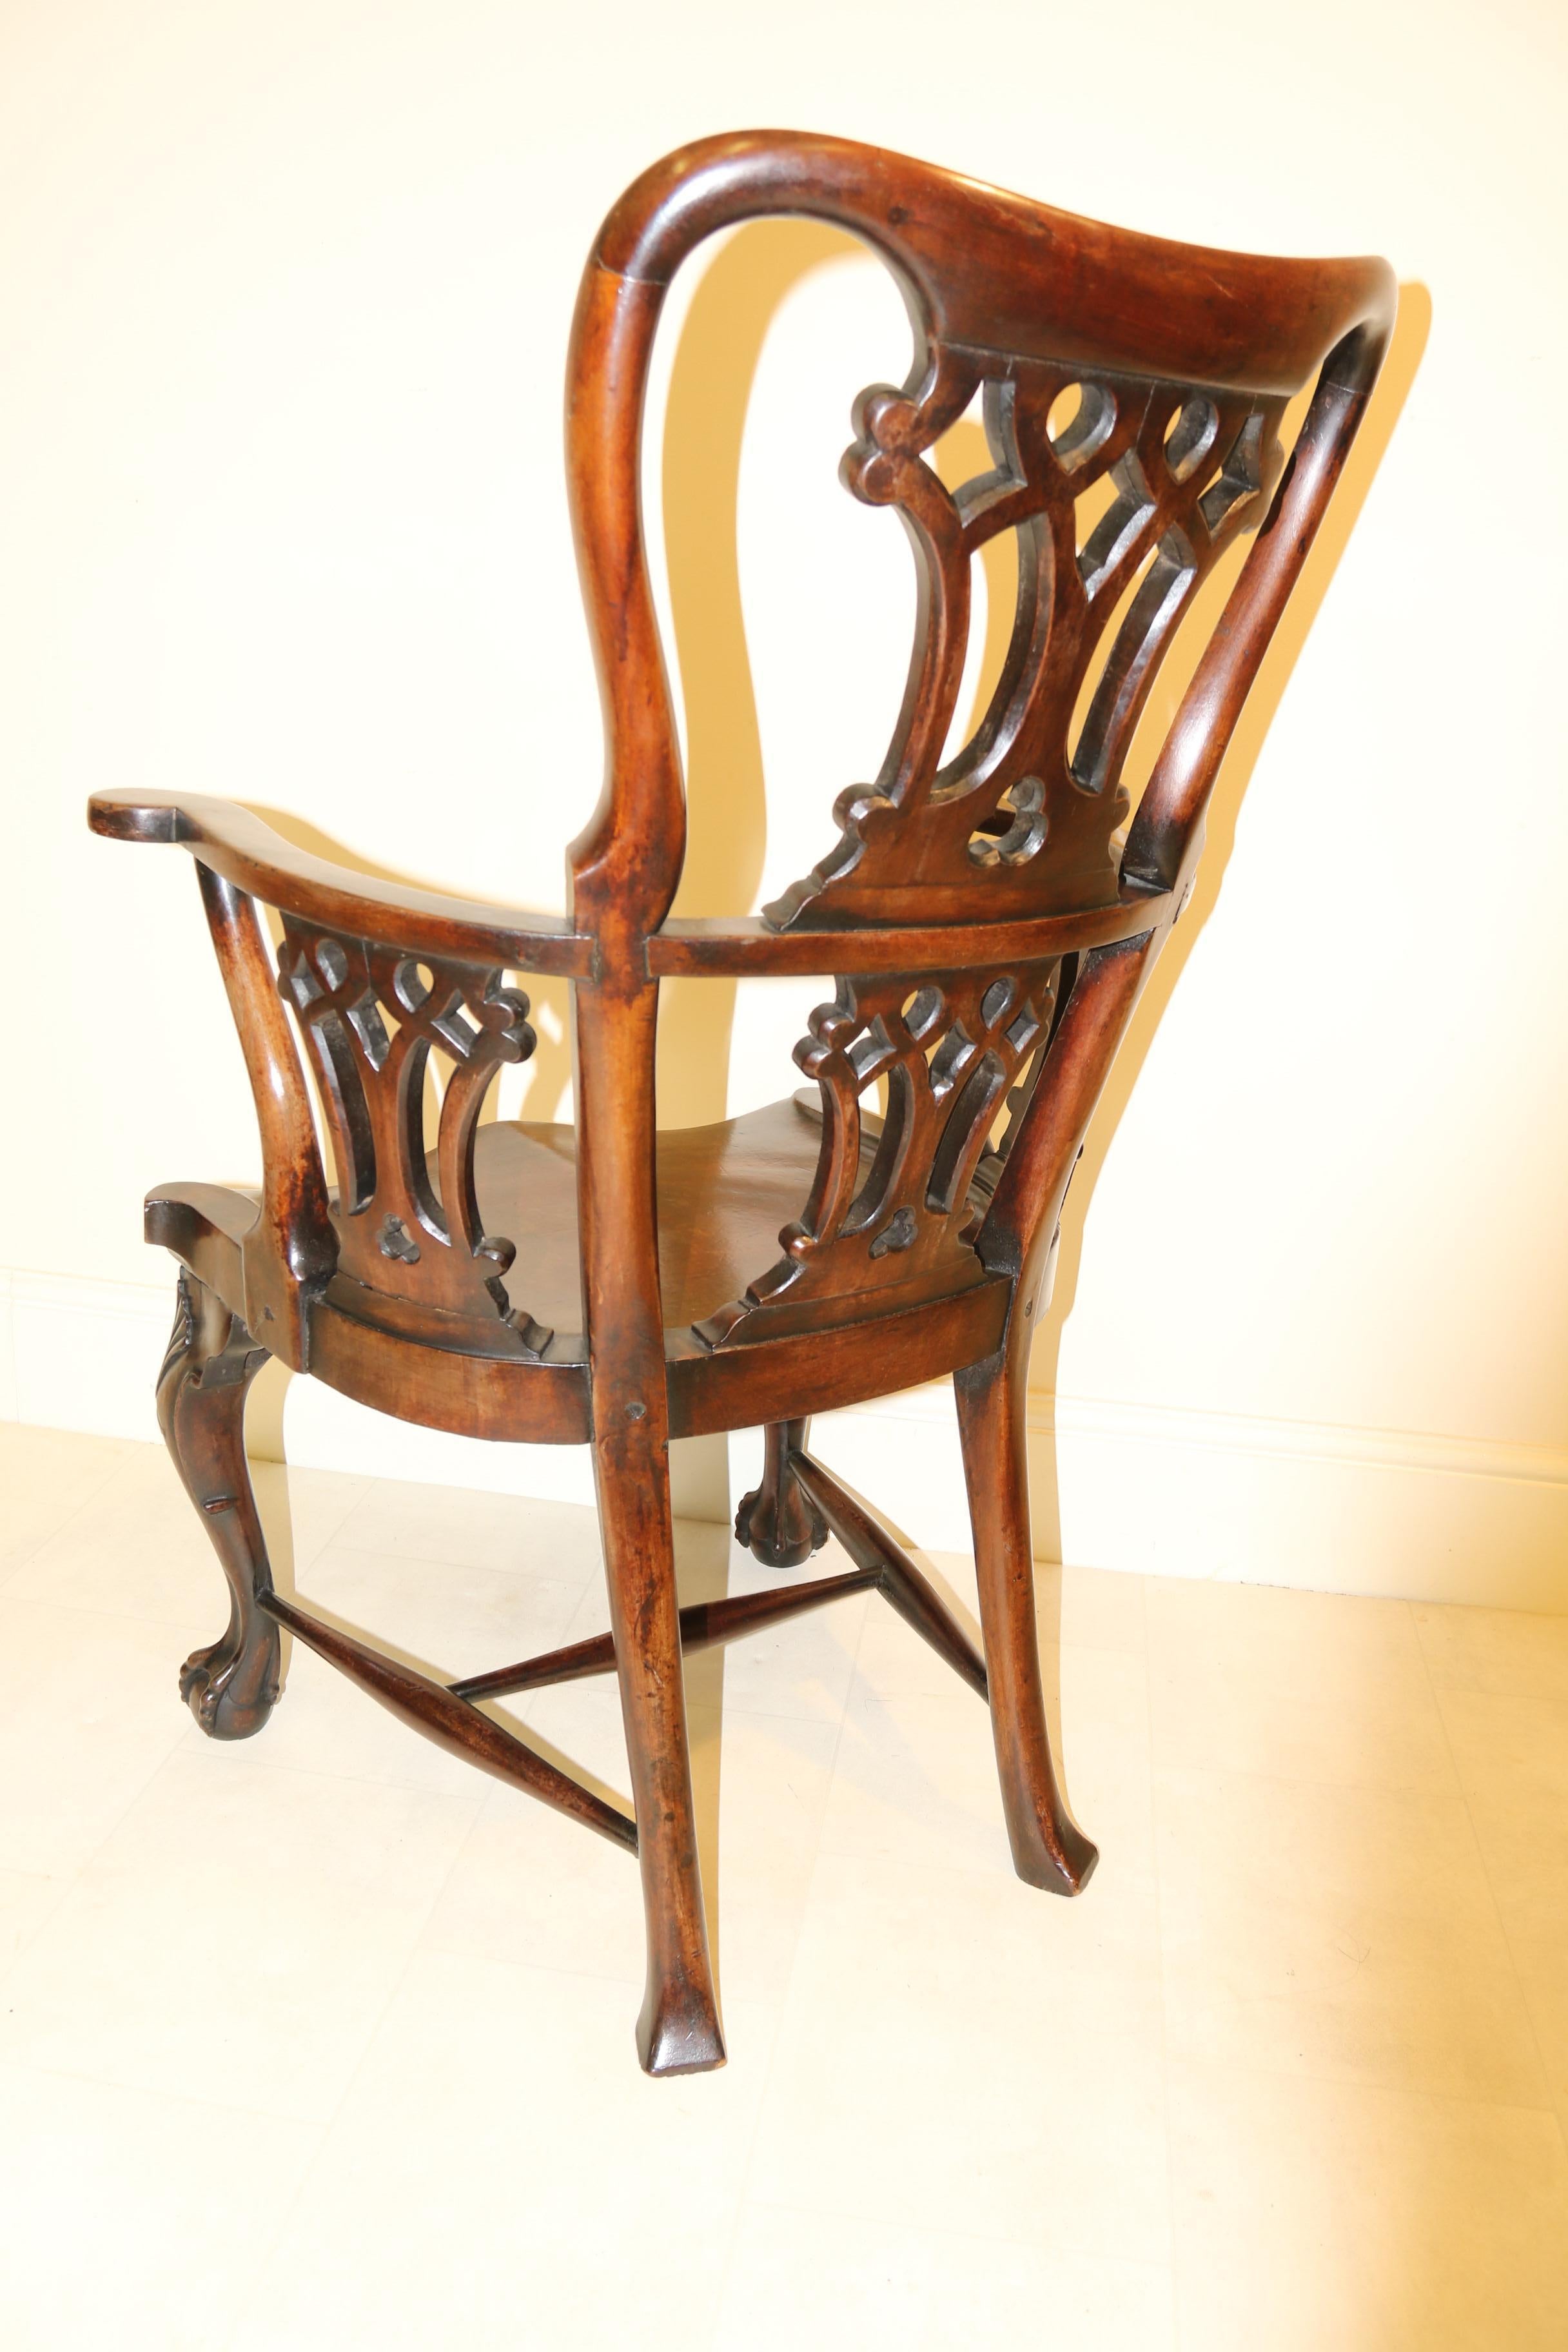 Antique English George II Period Mahogany Windsor Armchair, circa 1750 For Sale 13